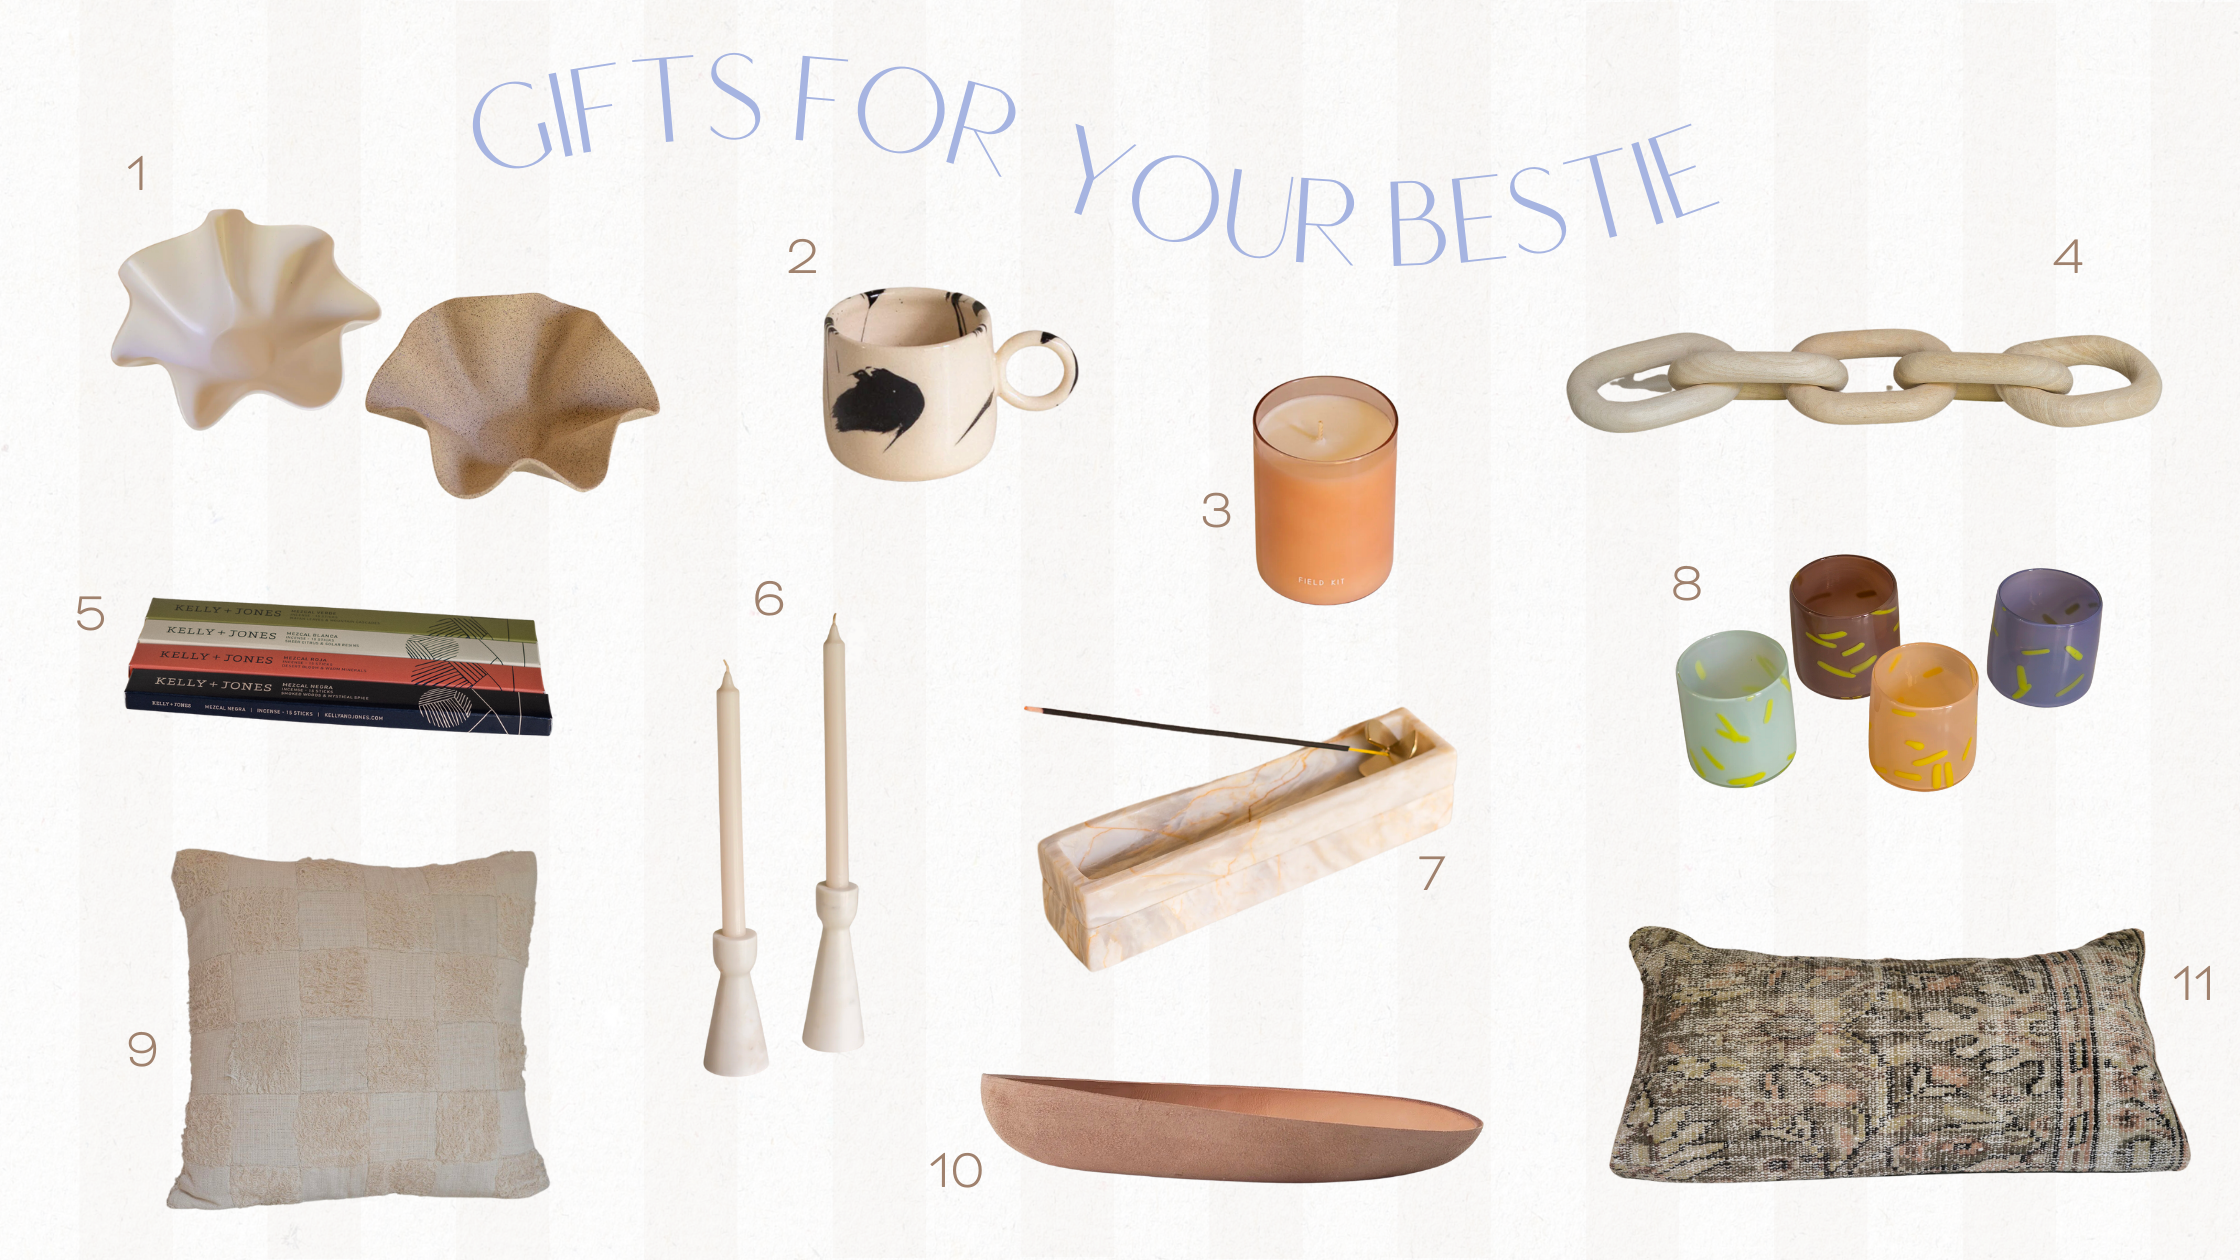 Holiday Gift Guide - Gift Ideas for Your Bestie